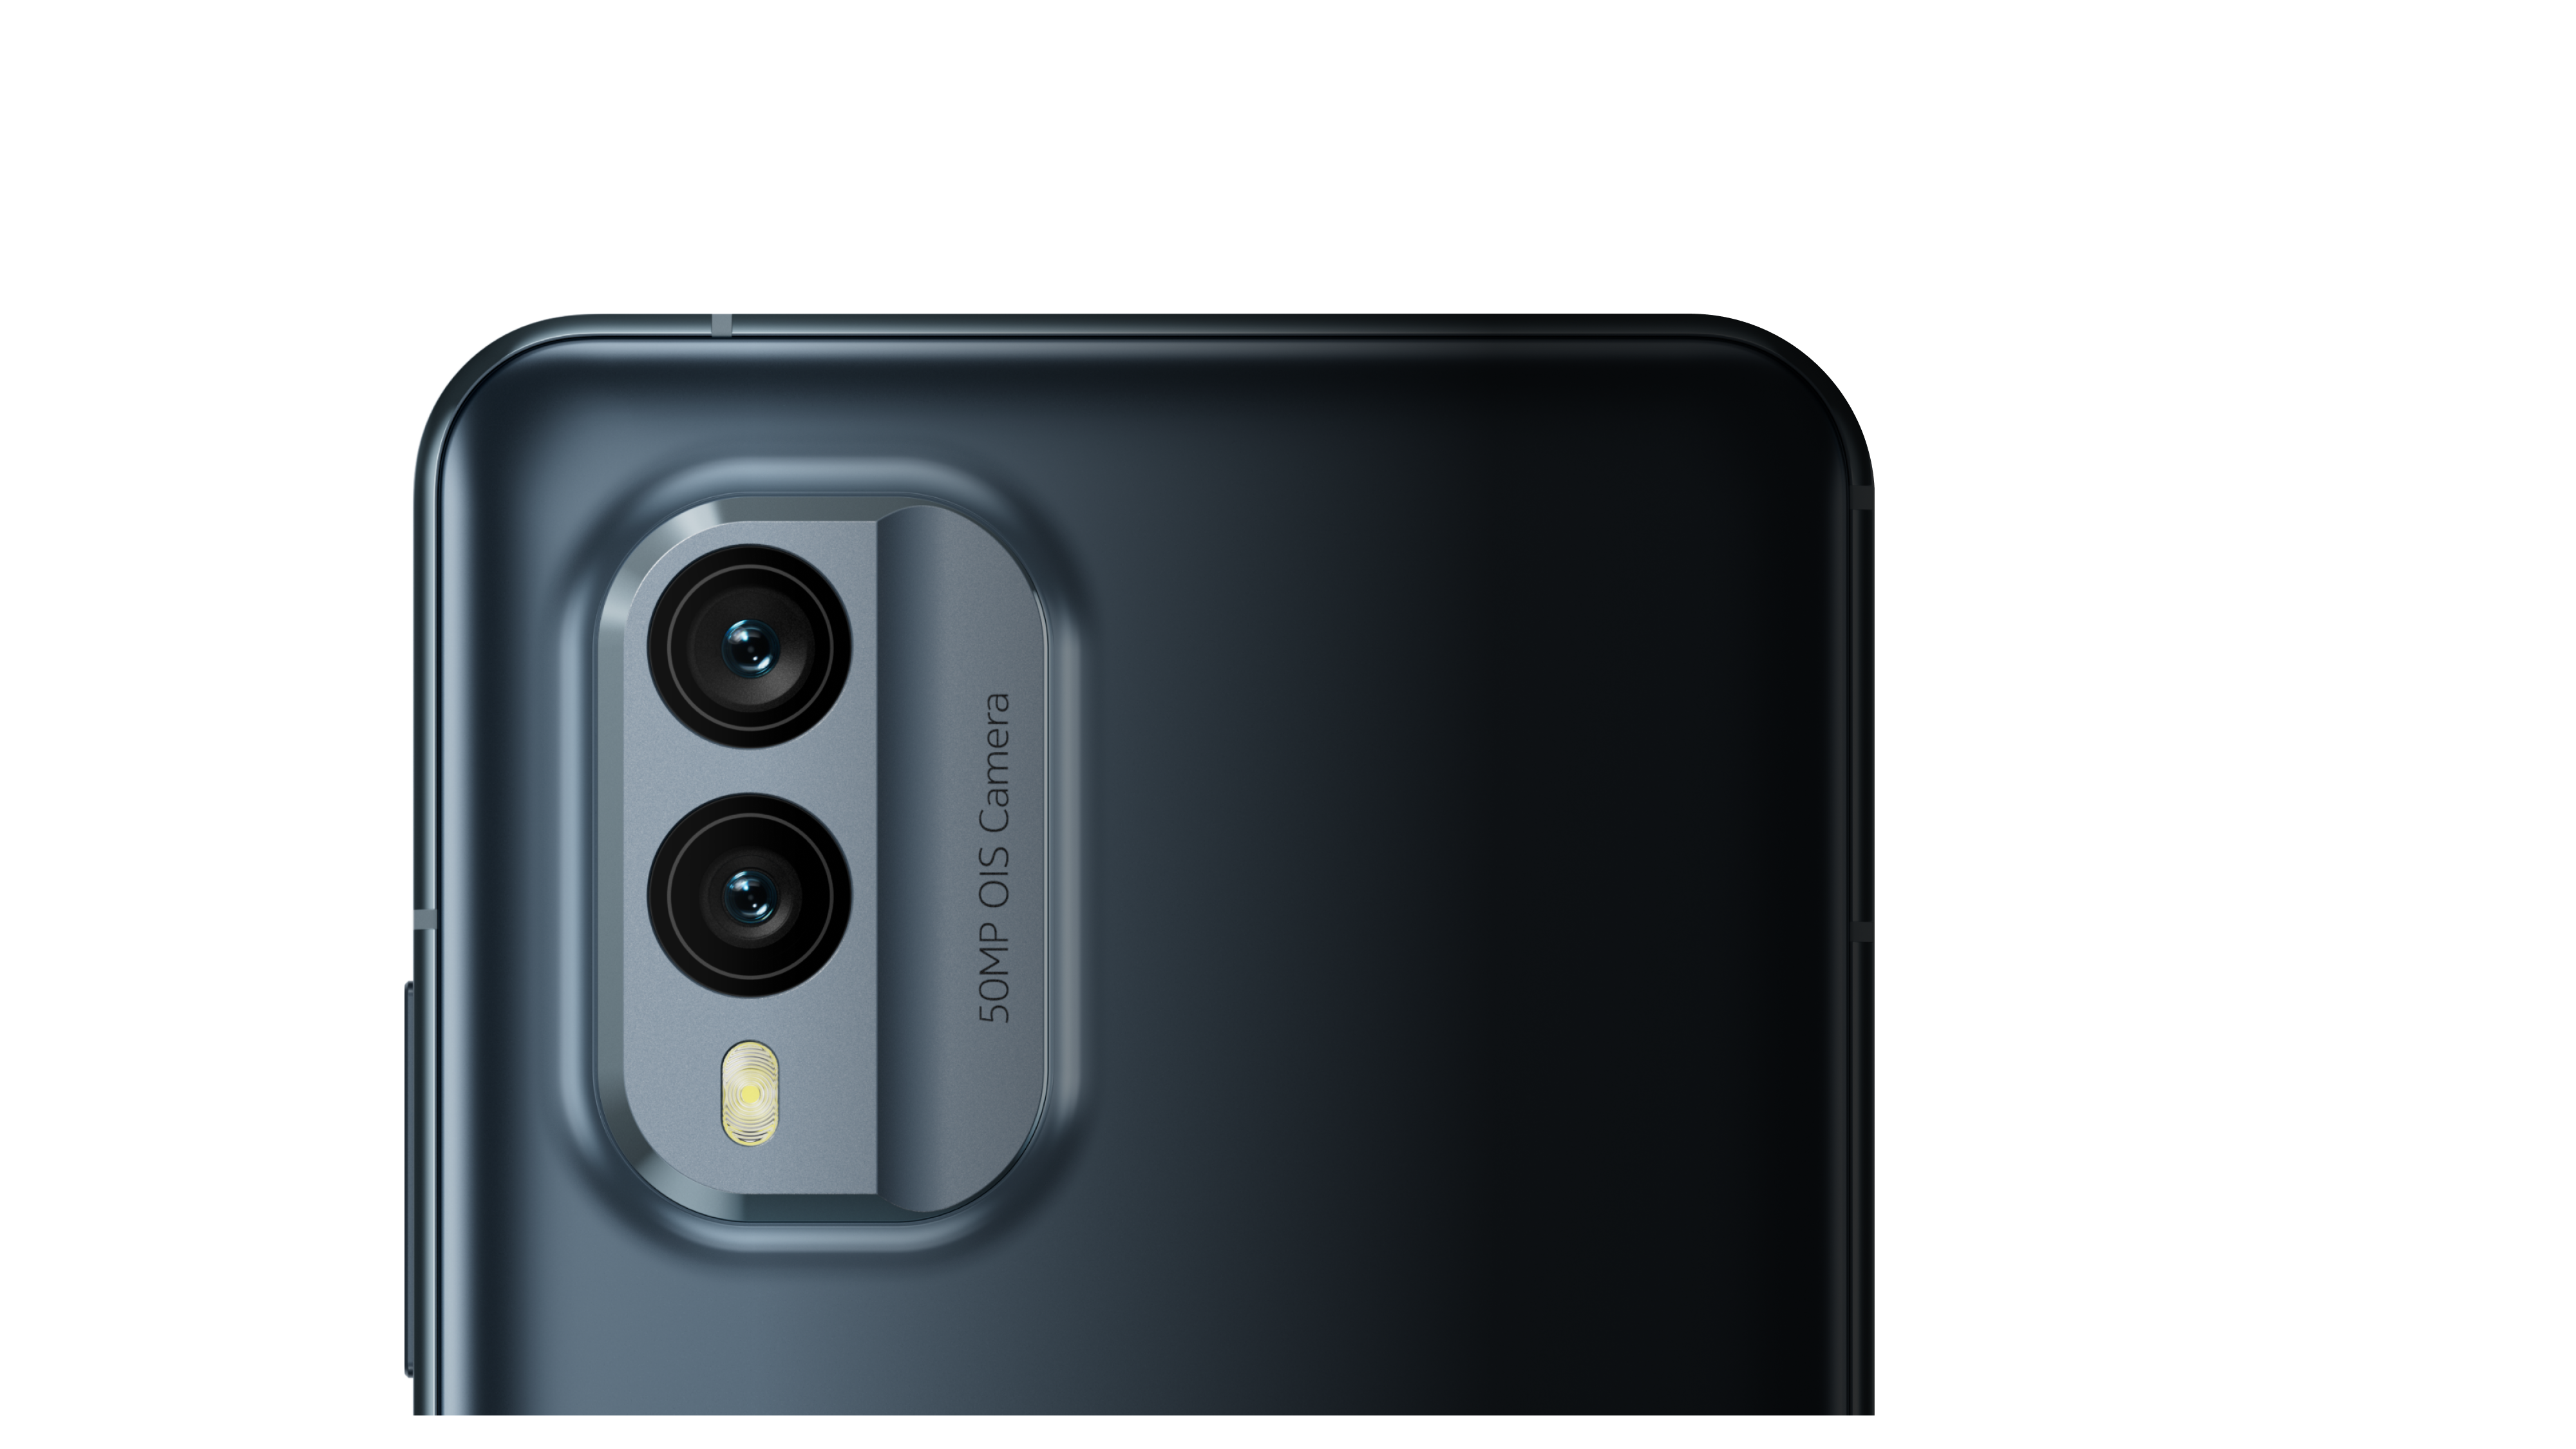 sustainable smartphone OIS camera with X30 5G Nokia